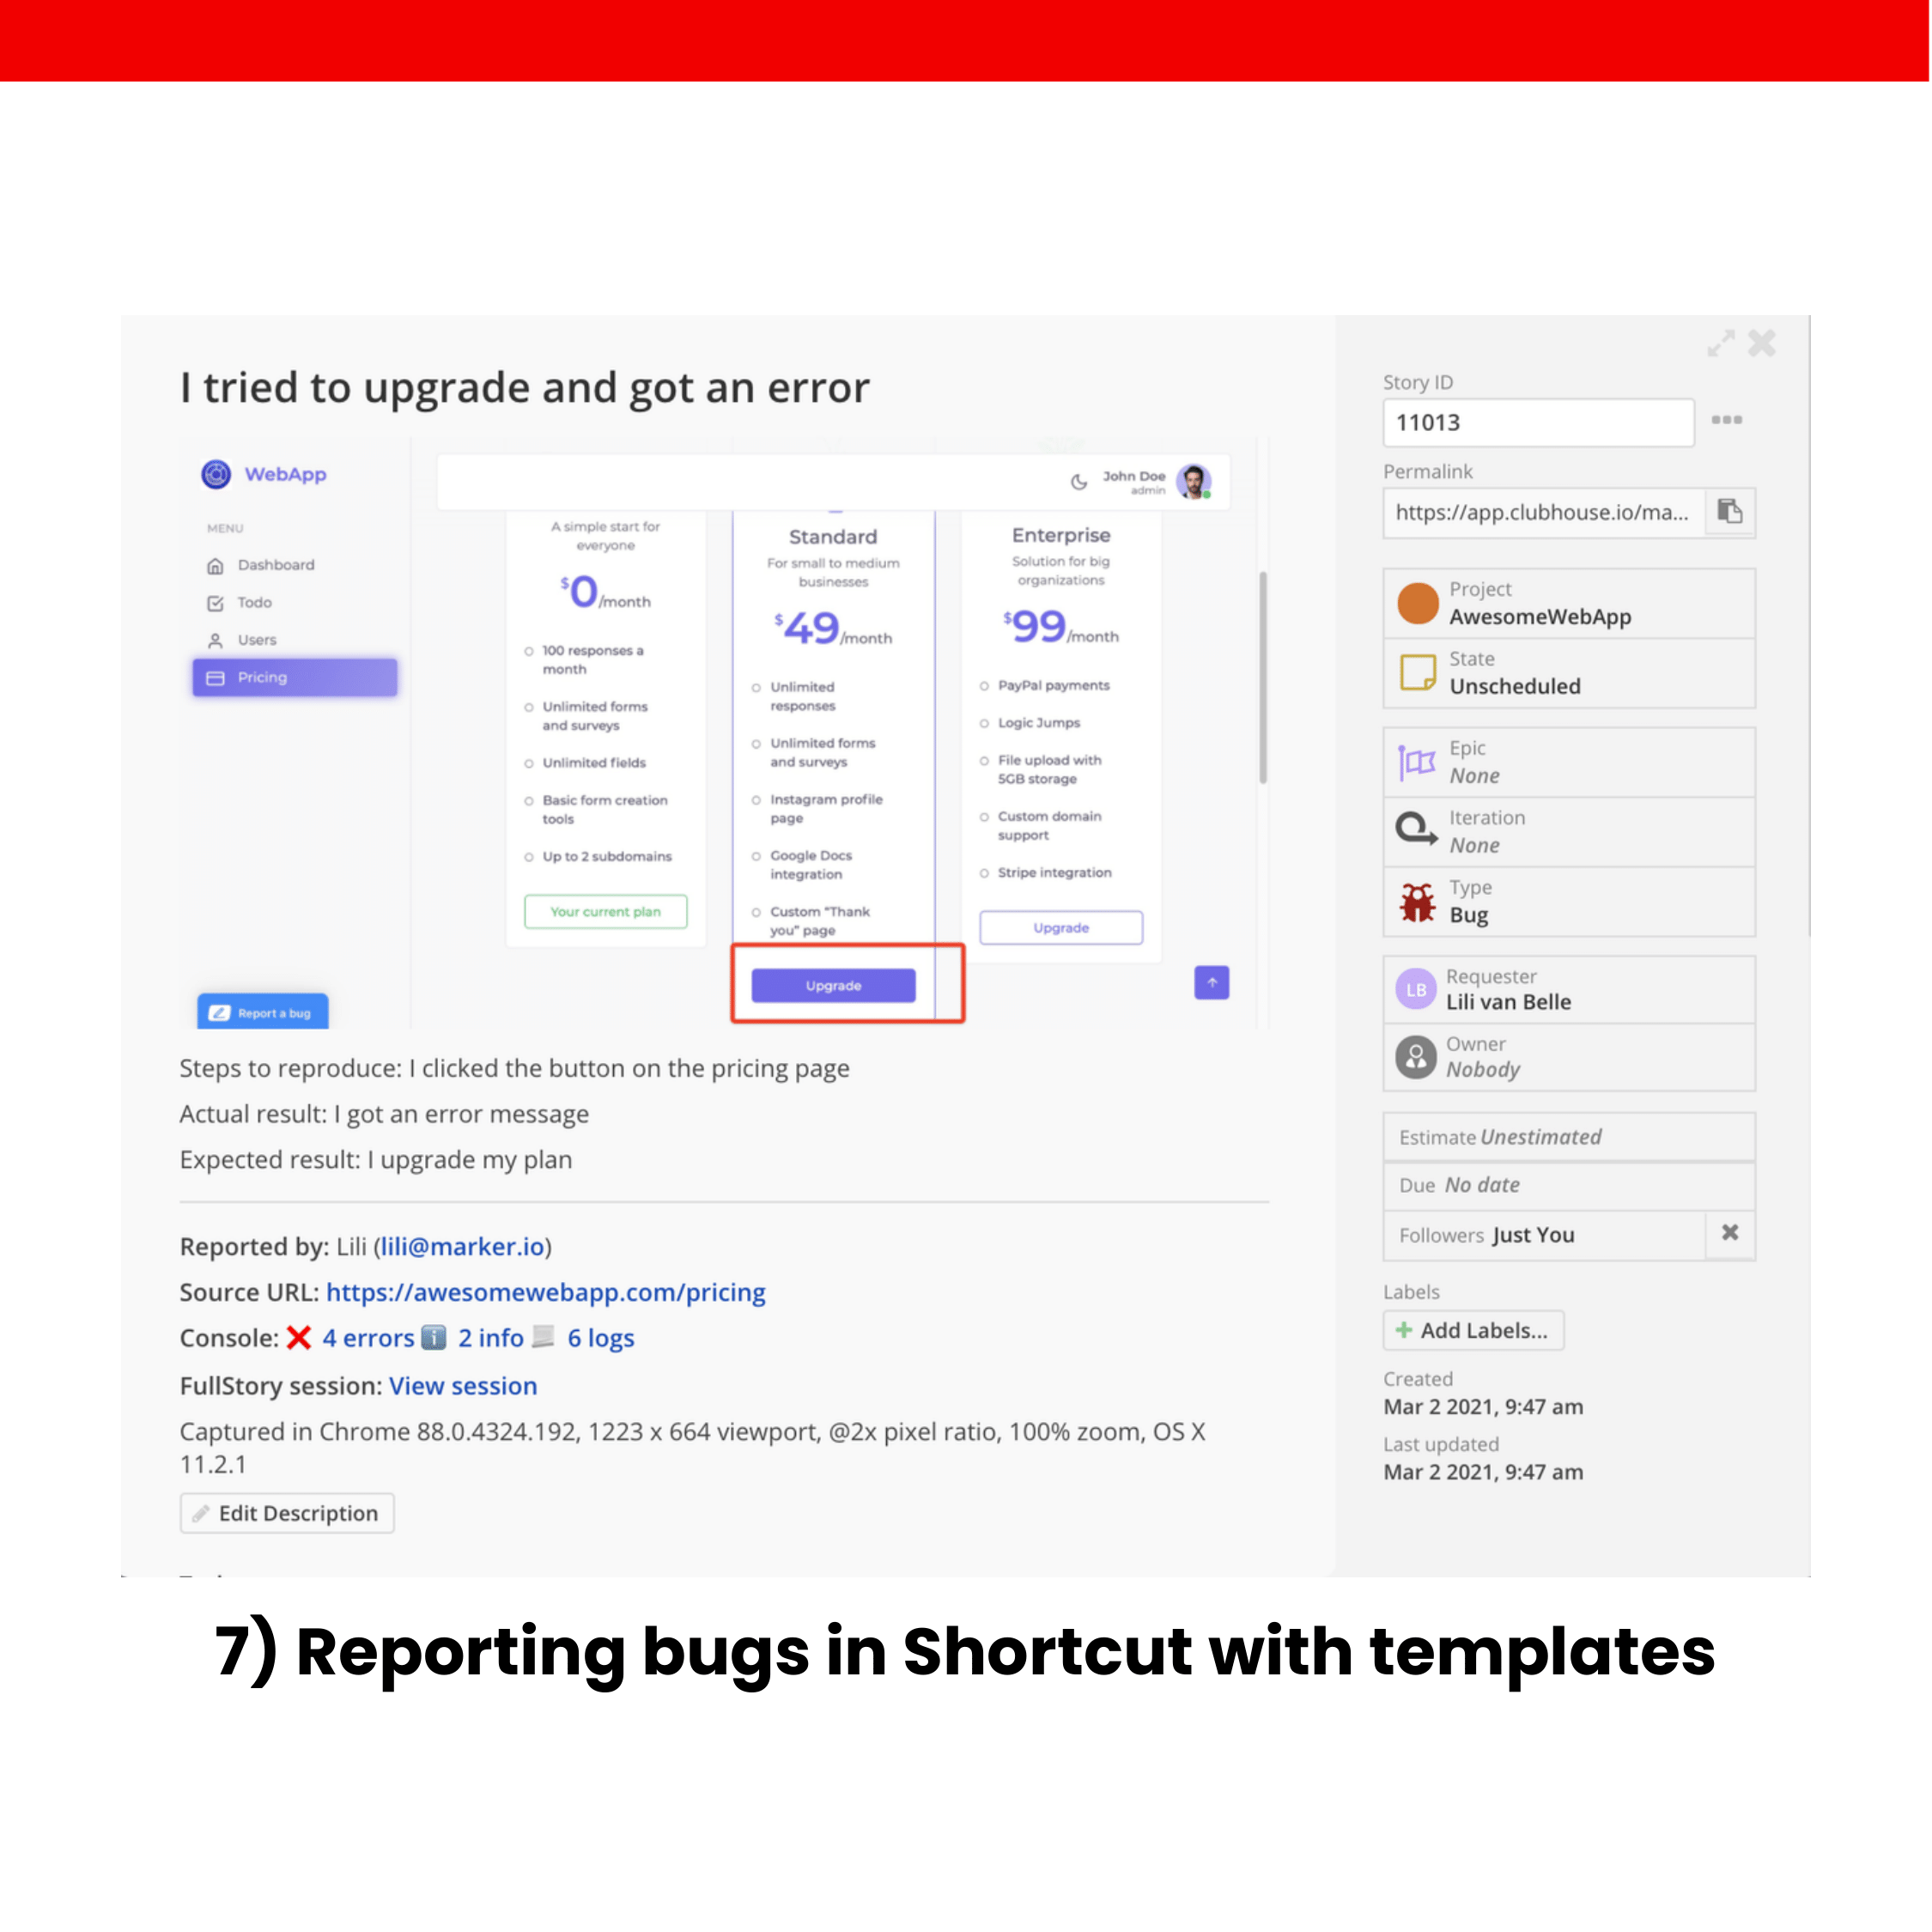 7) Reporting bugs in Shortcut with templates